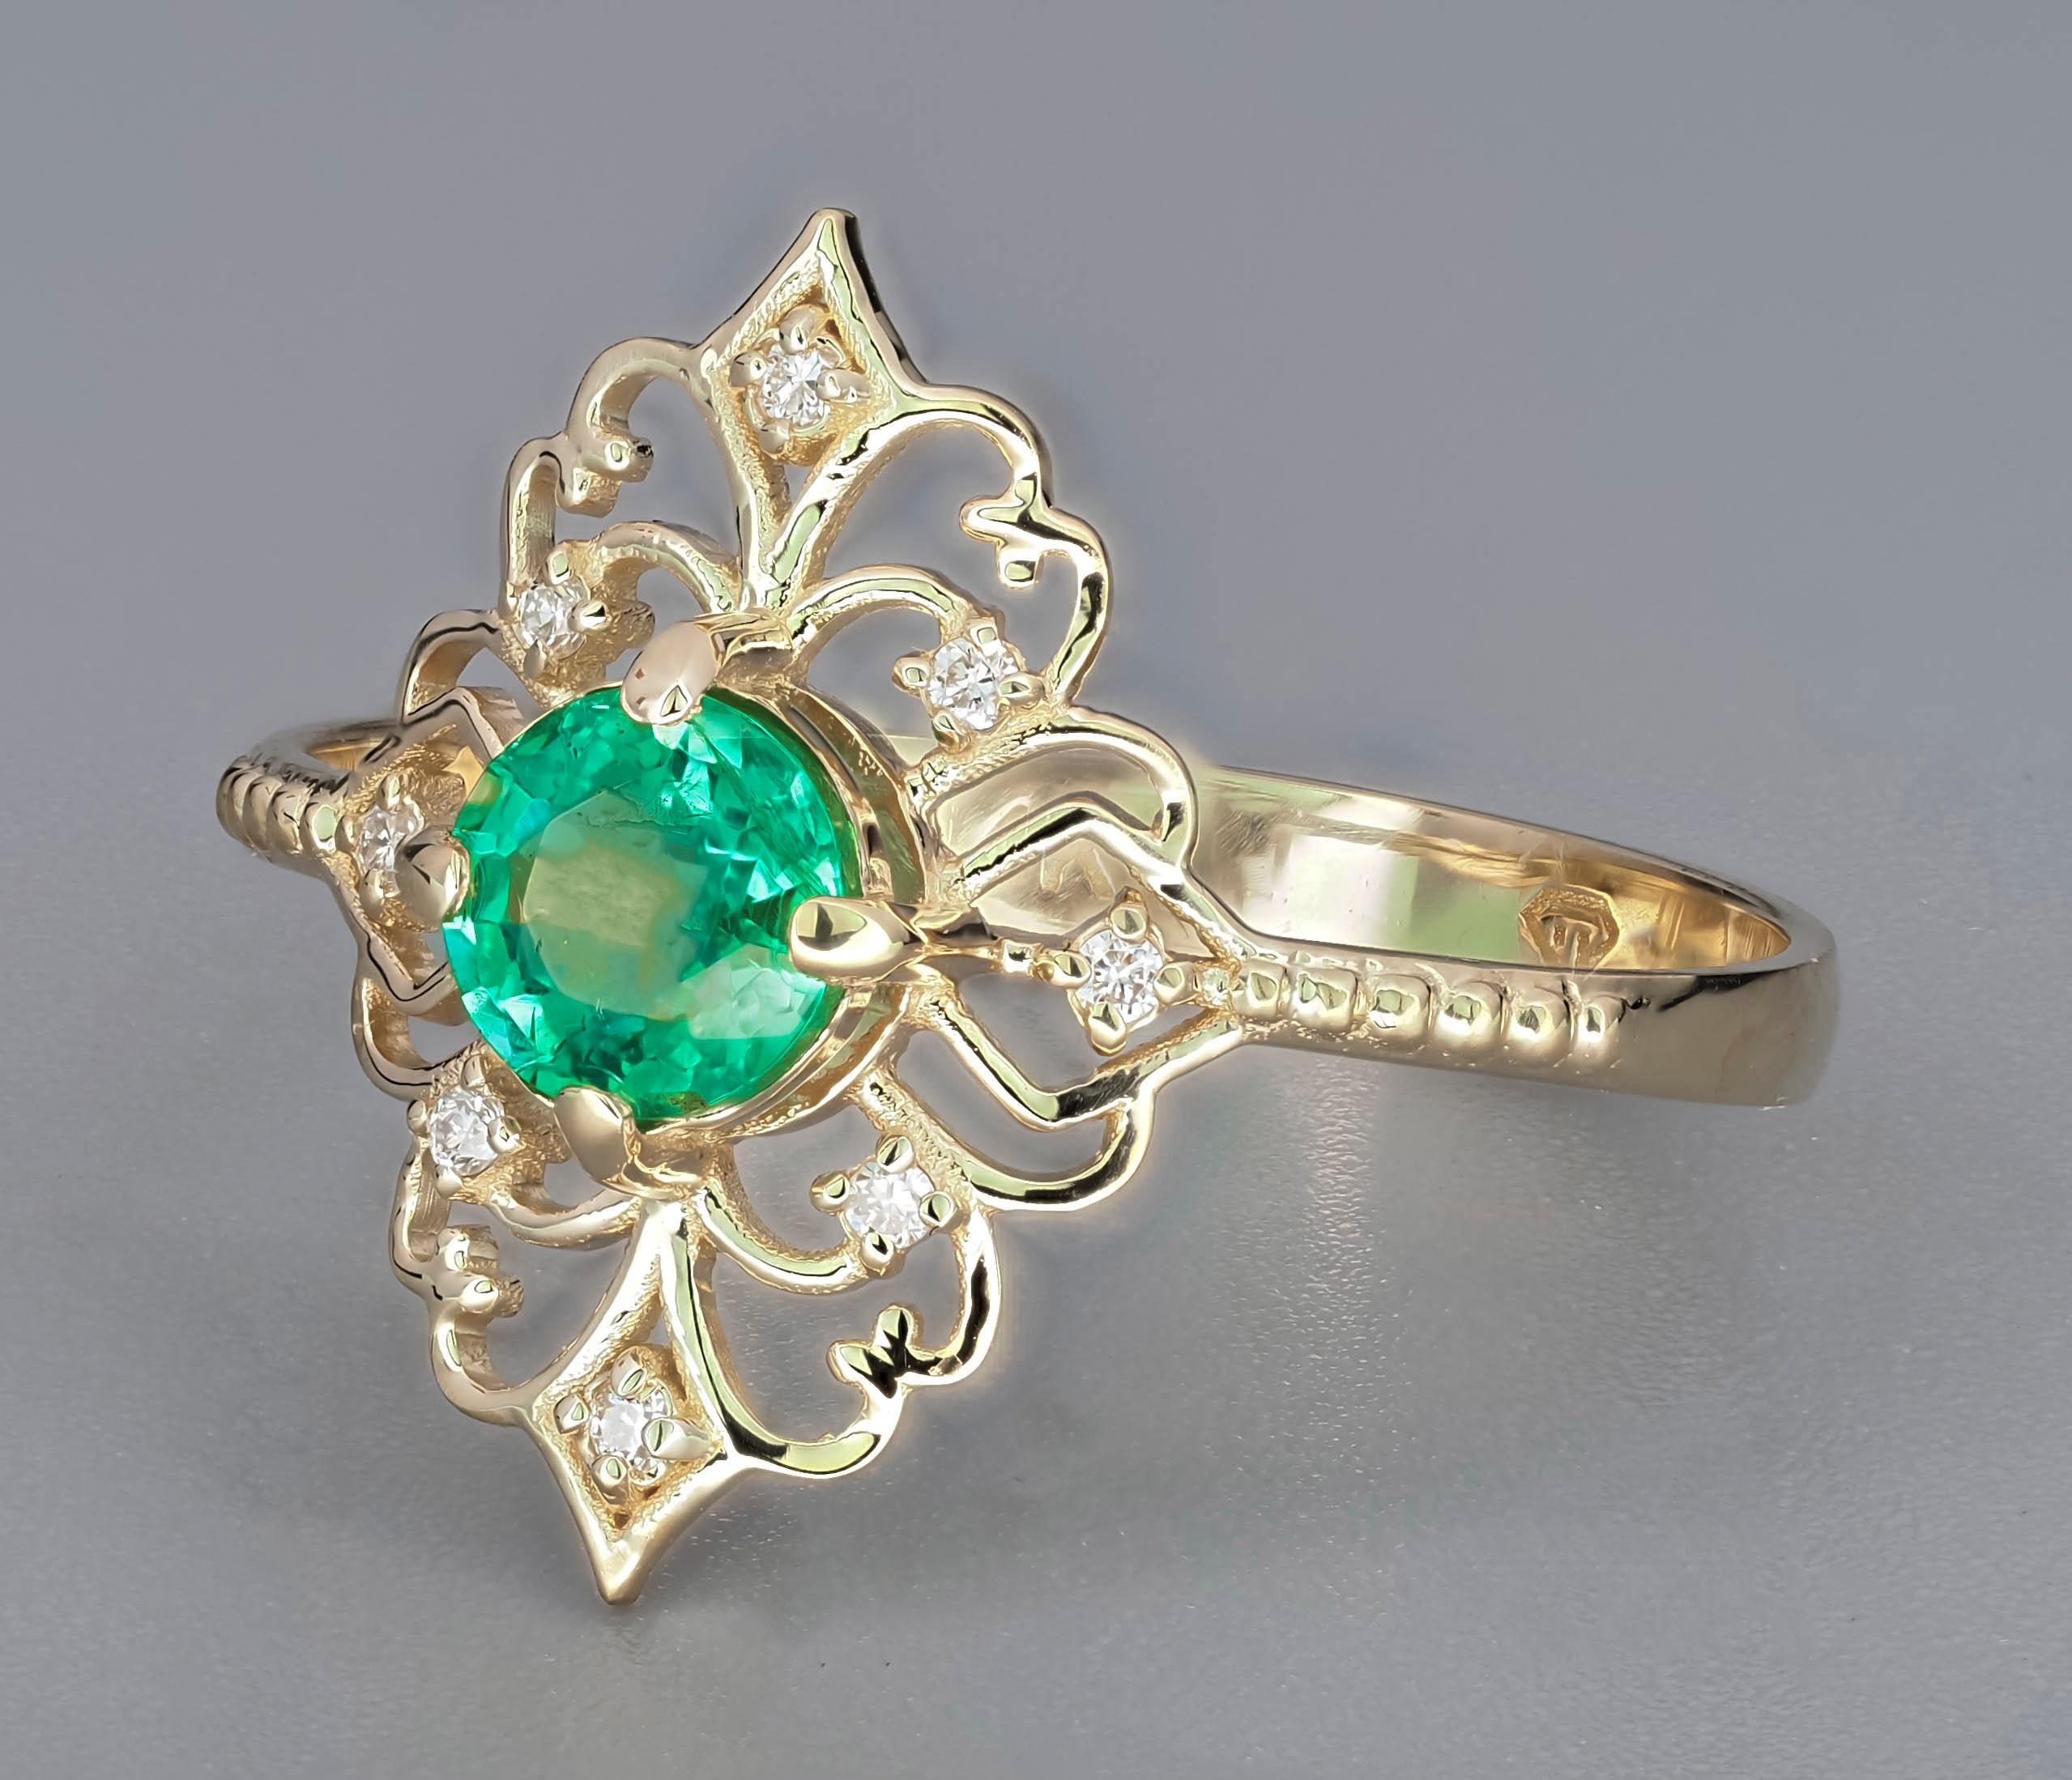 For Sale:  14 K Gold Ring with Emerald and Diamonds 18